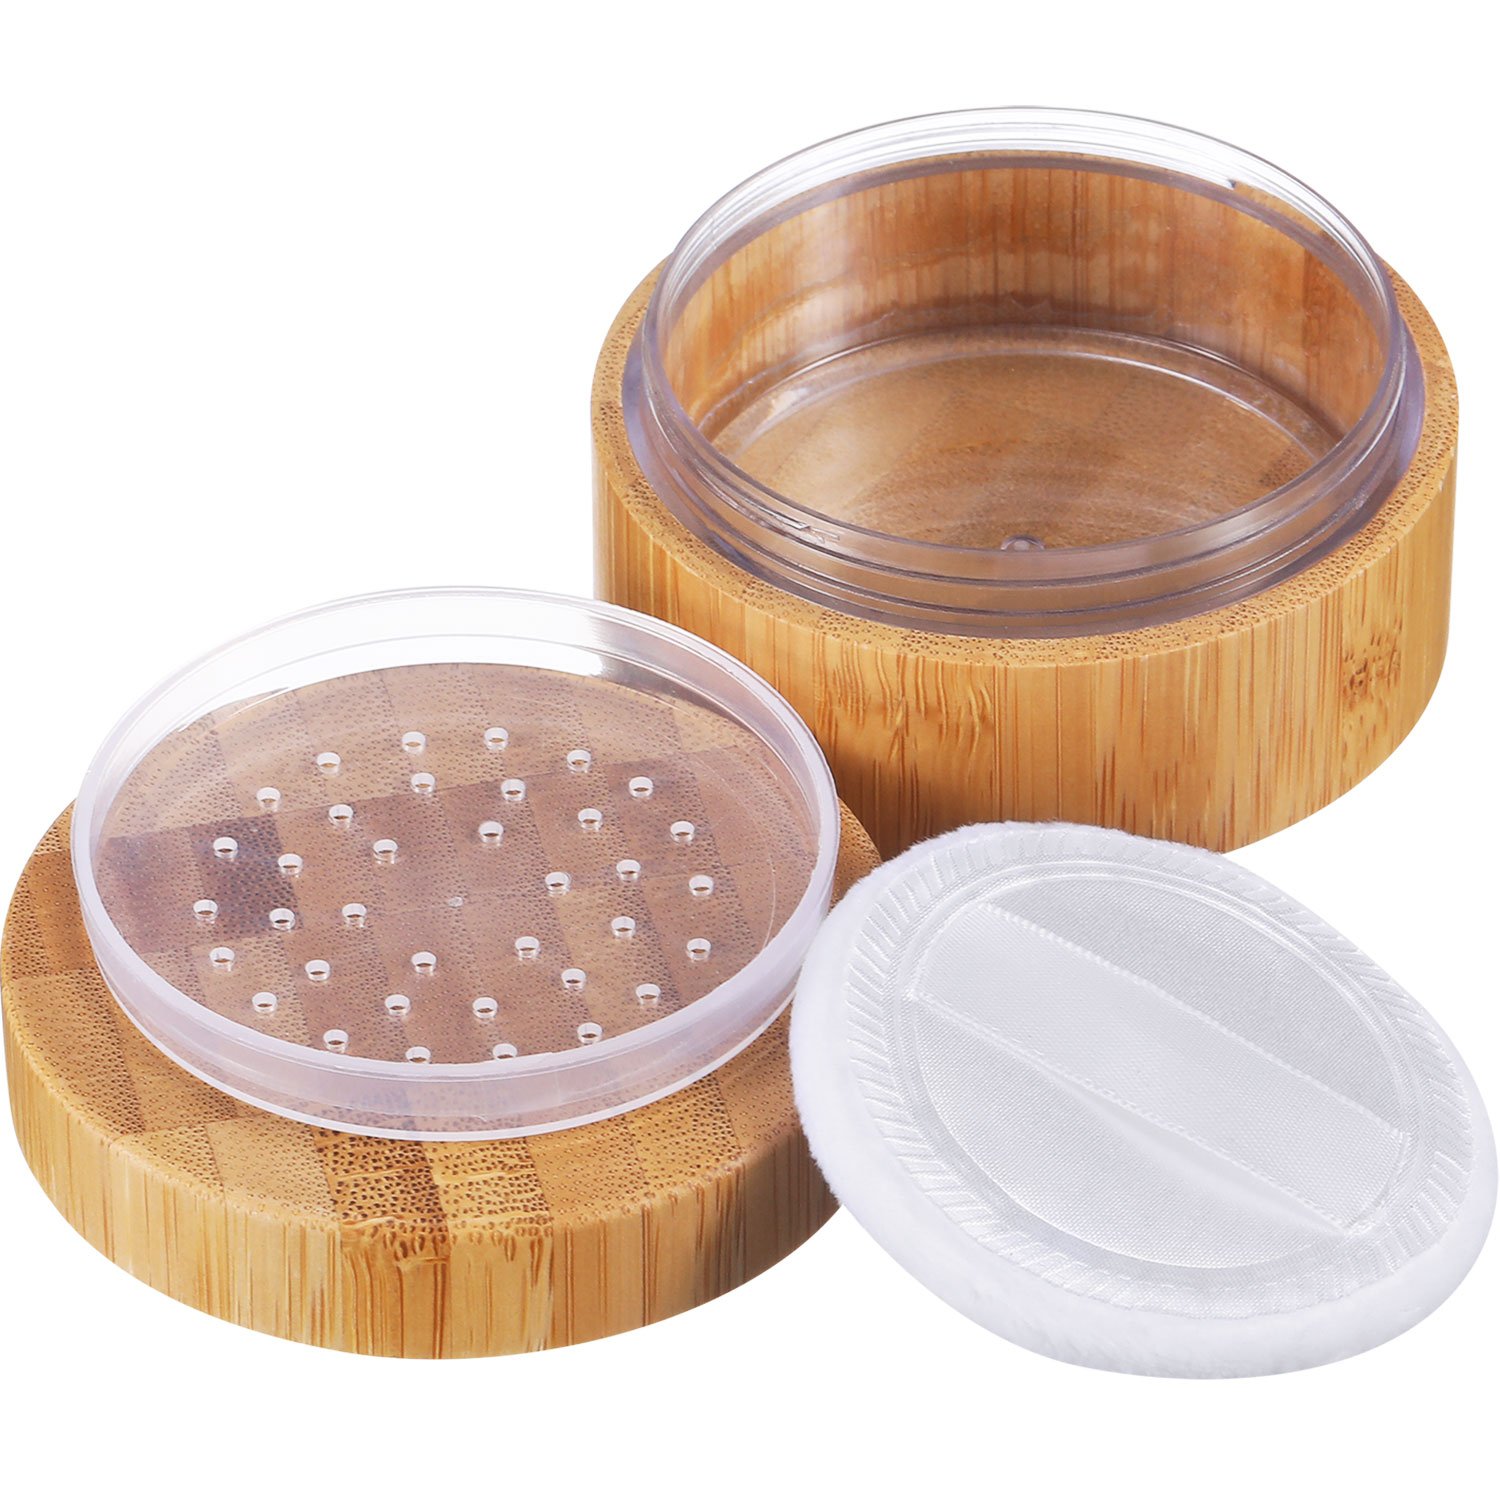 Frienda 30 ml Empty Loose Powder Container Bamboo Cosmetic Make-up